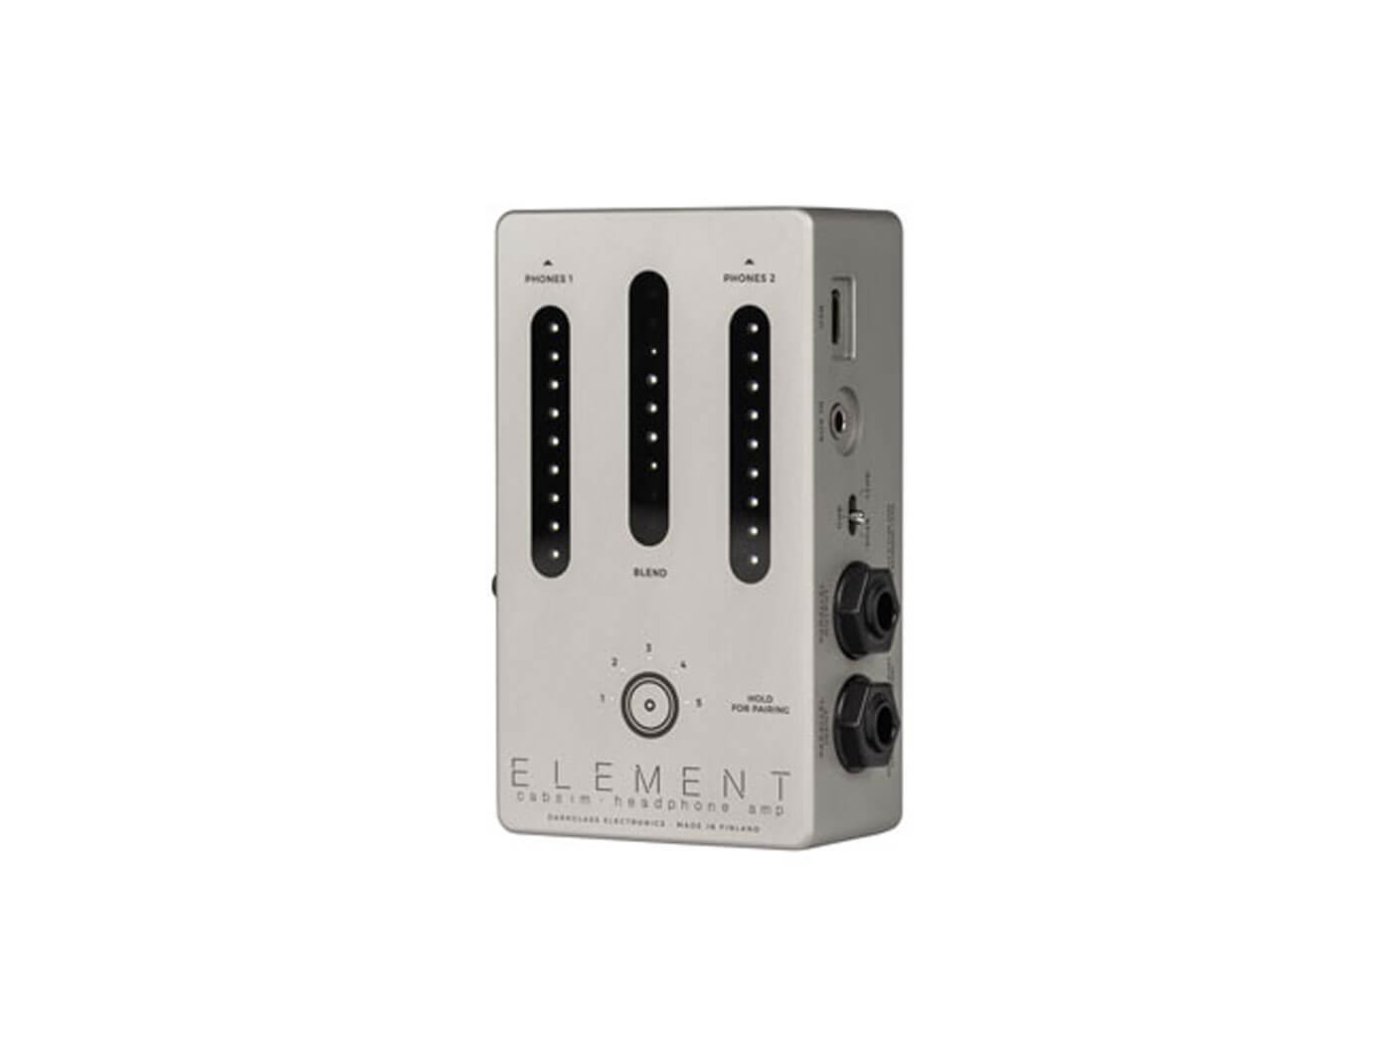 Darkglass unveils the Element pedal-sized headphone amp and cab-sim box